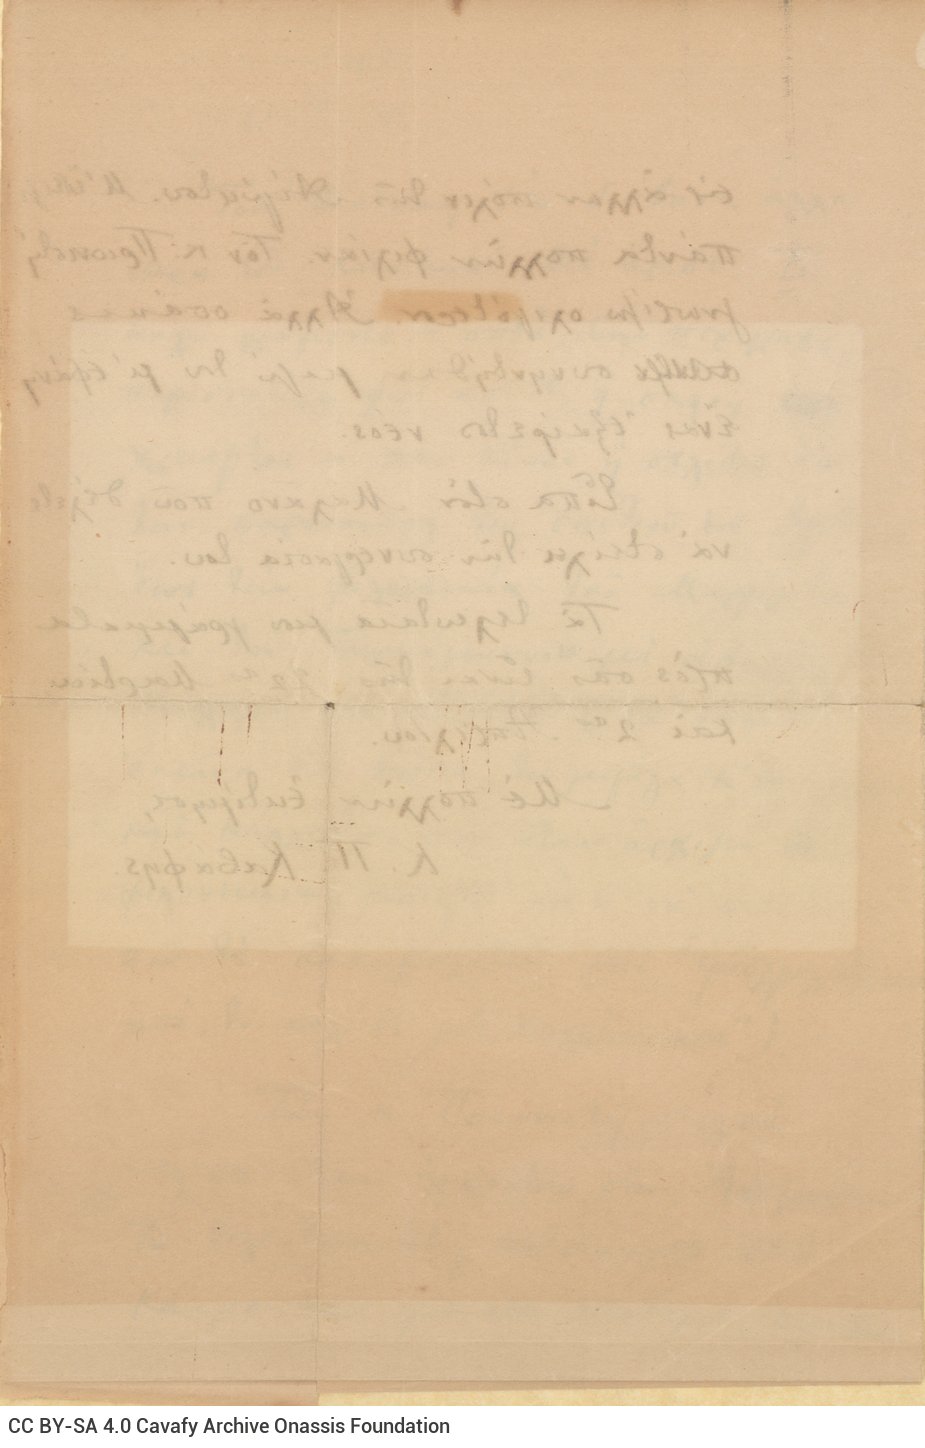 Handwritten letter by Cavafy to Marios Vaianos on the first three pages of a bifolio. The last page is blank. The sender info